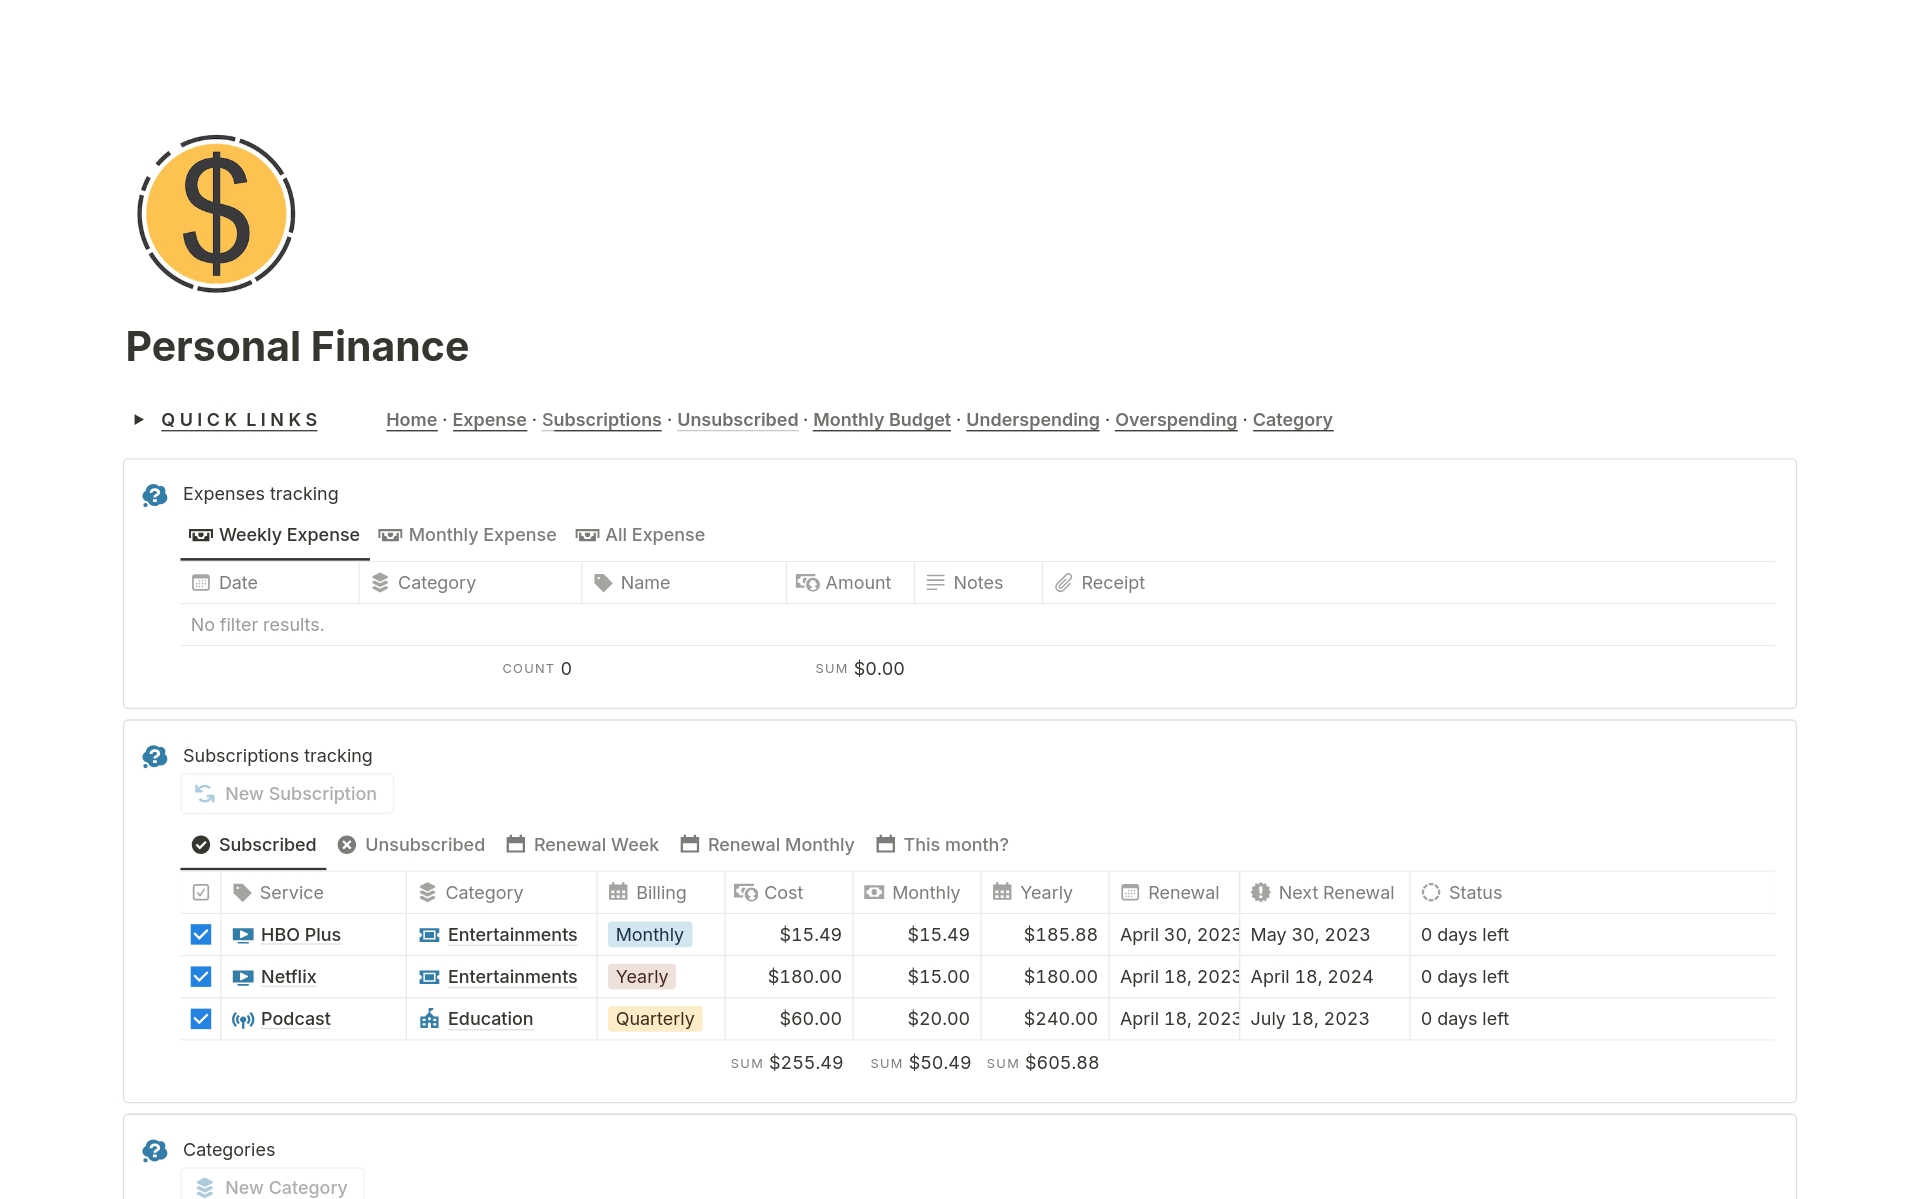 Track your personal finances by quickly logging income and expenditure, linking it to contacts, clients, and categories. 